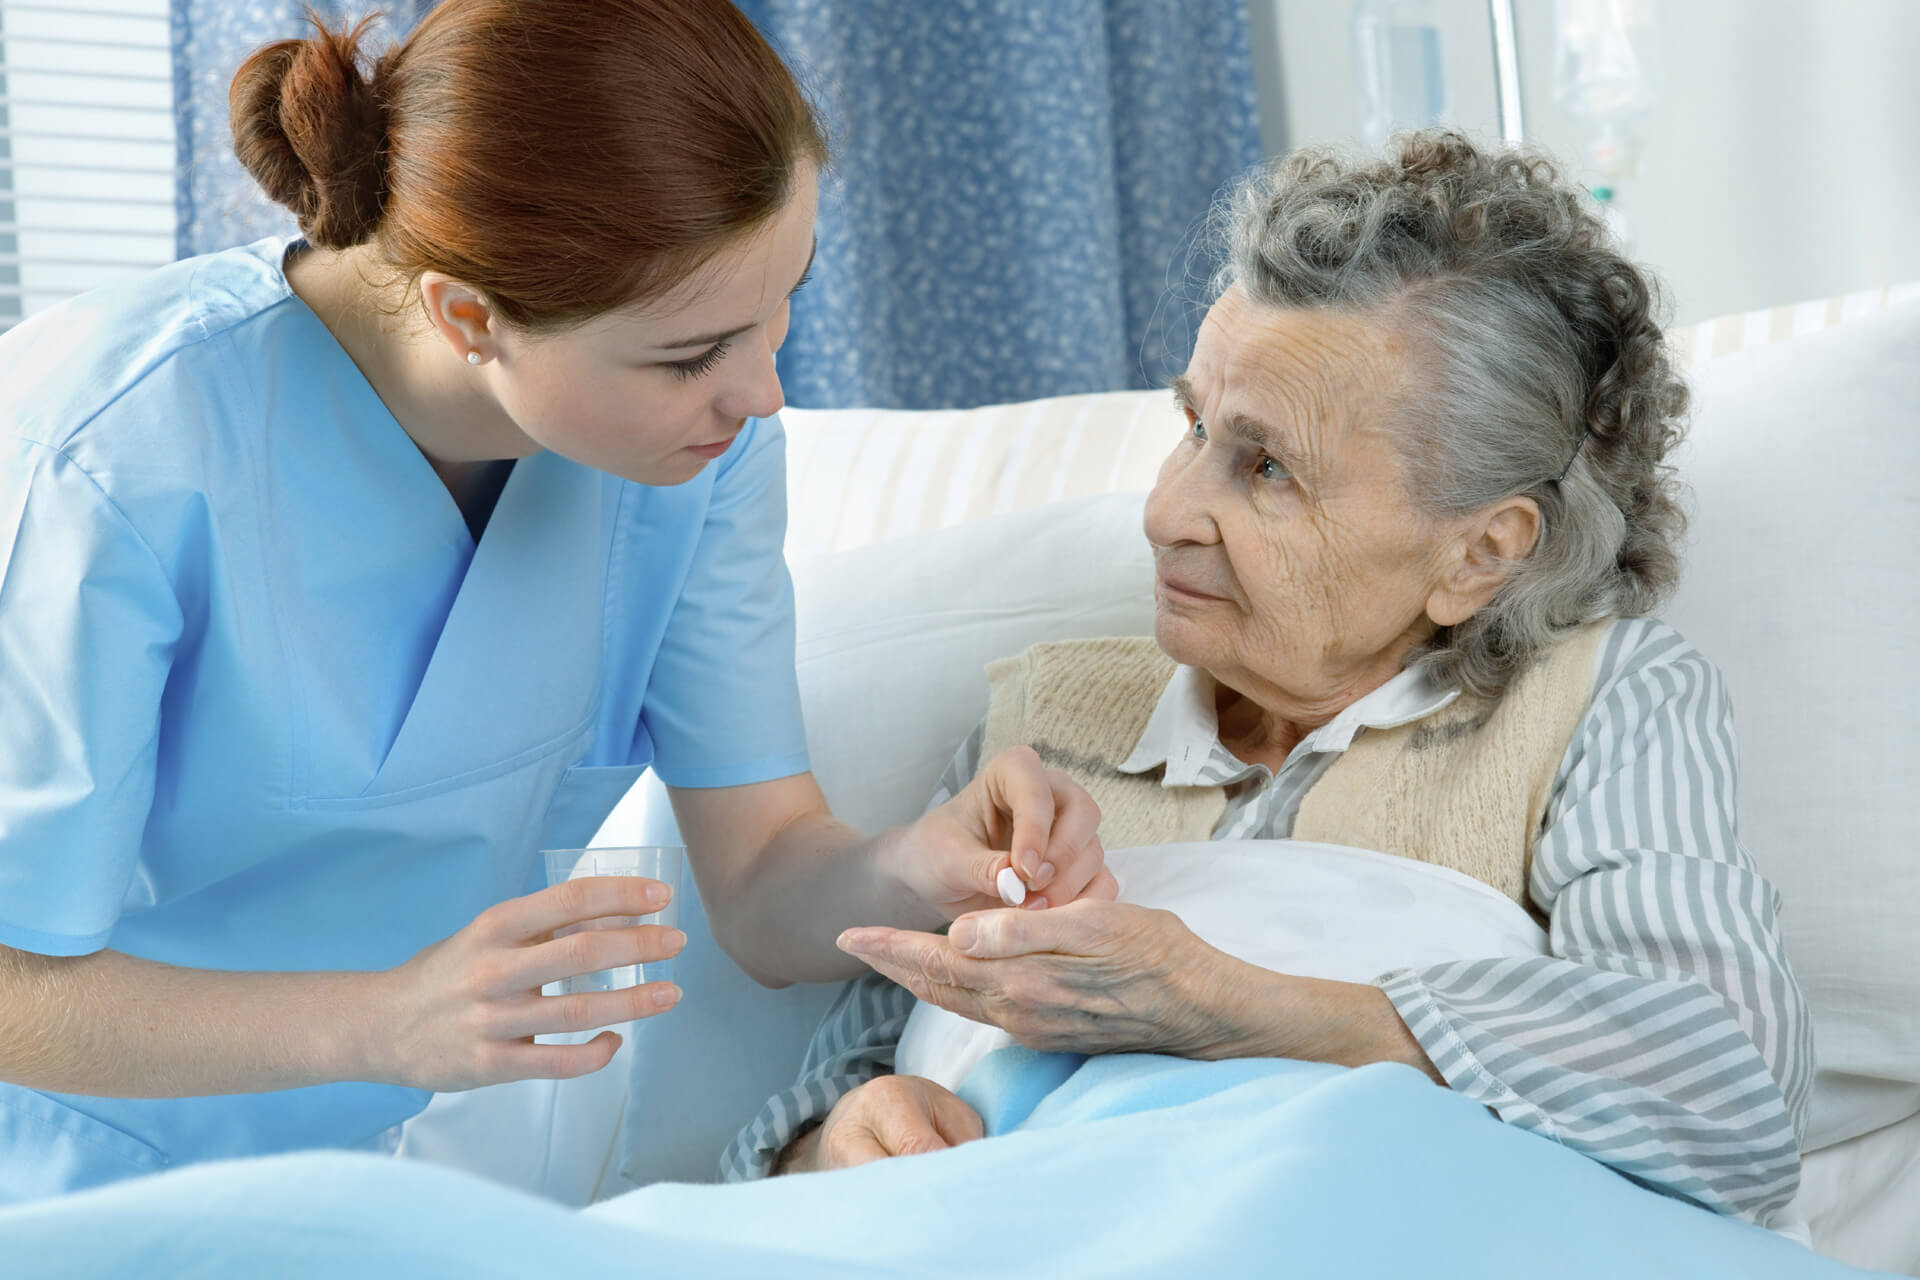 Home Nursing Care vs. Personal Home Care Assistance: What’s the Difference?